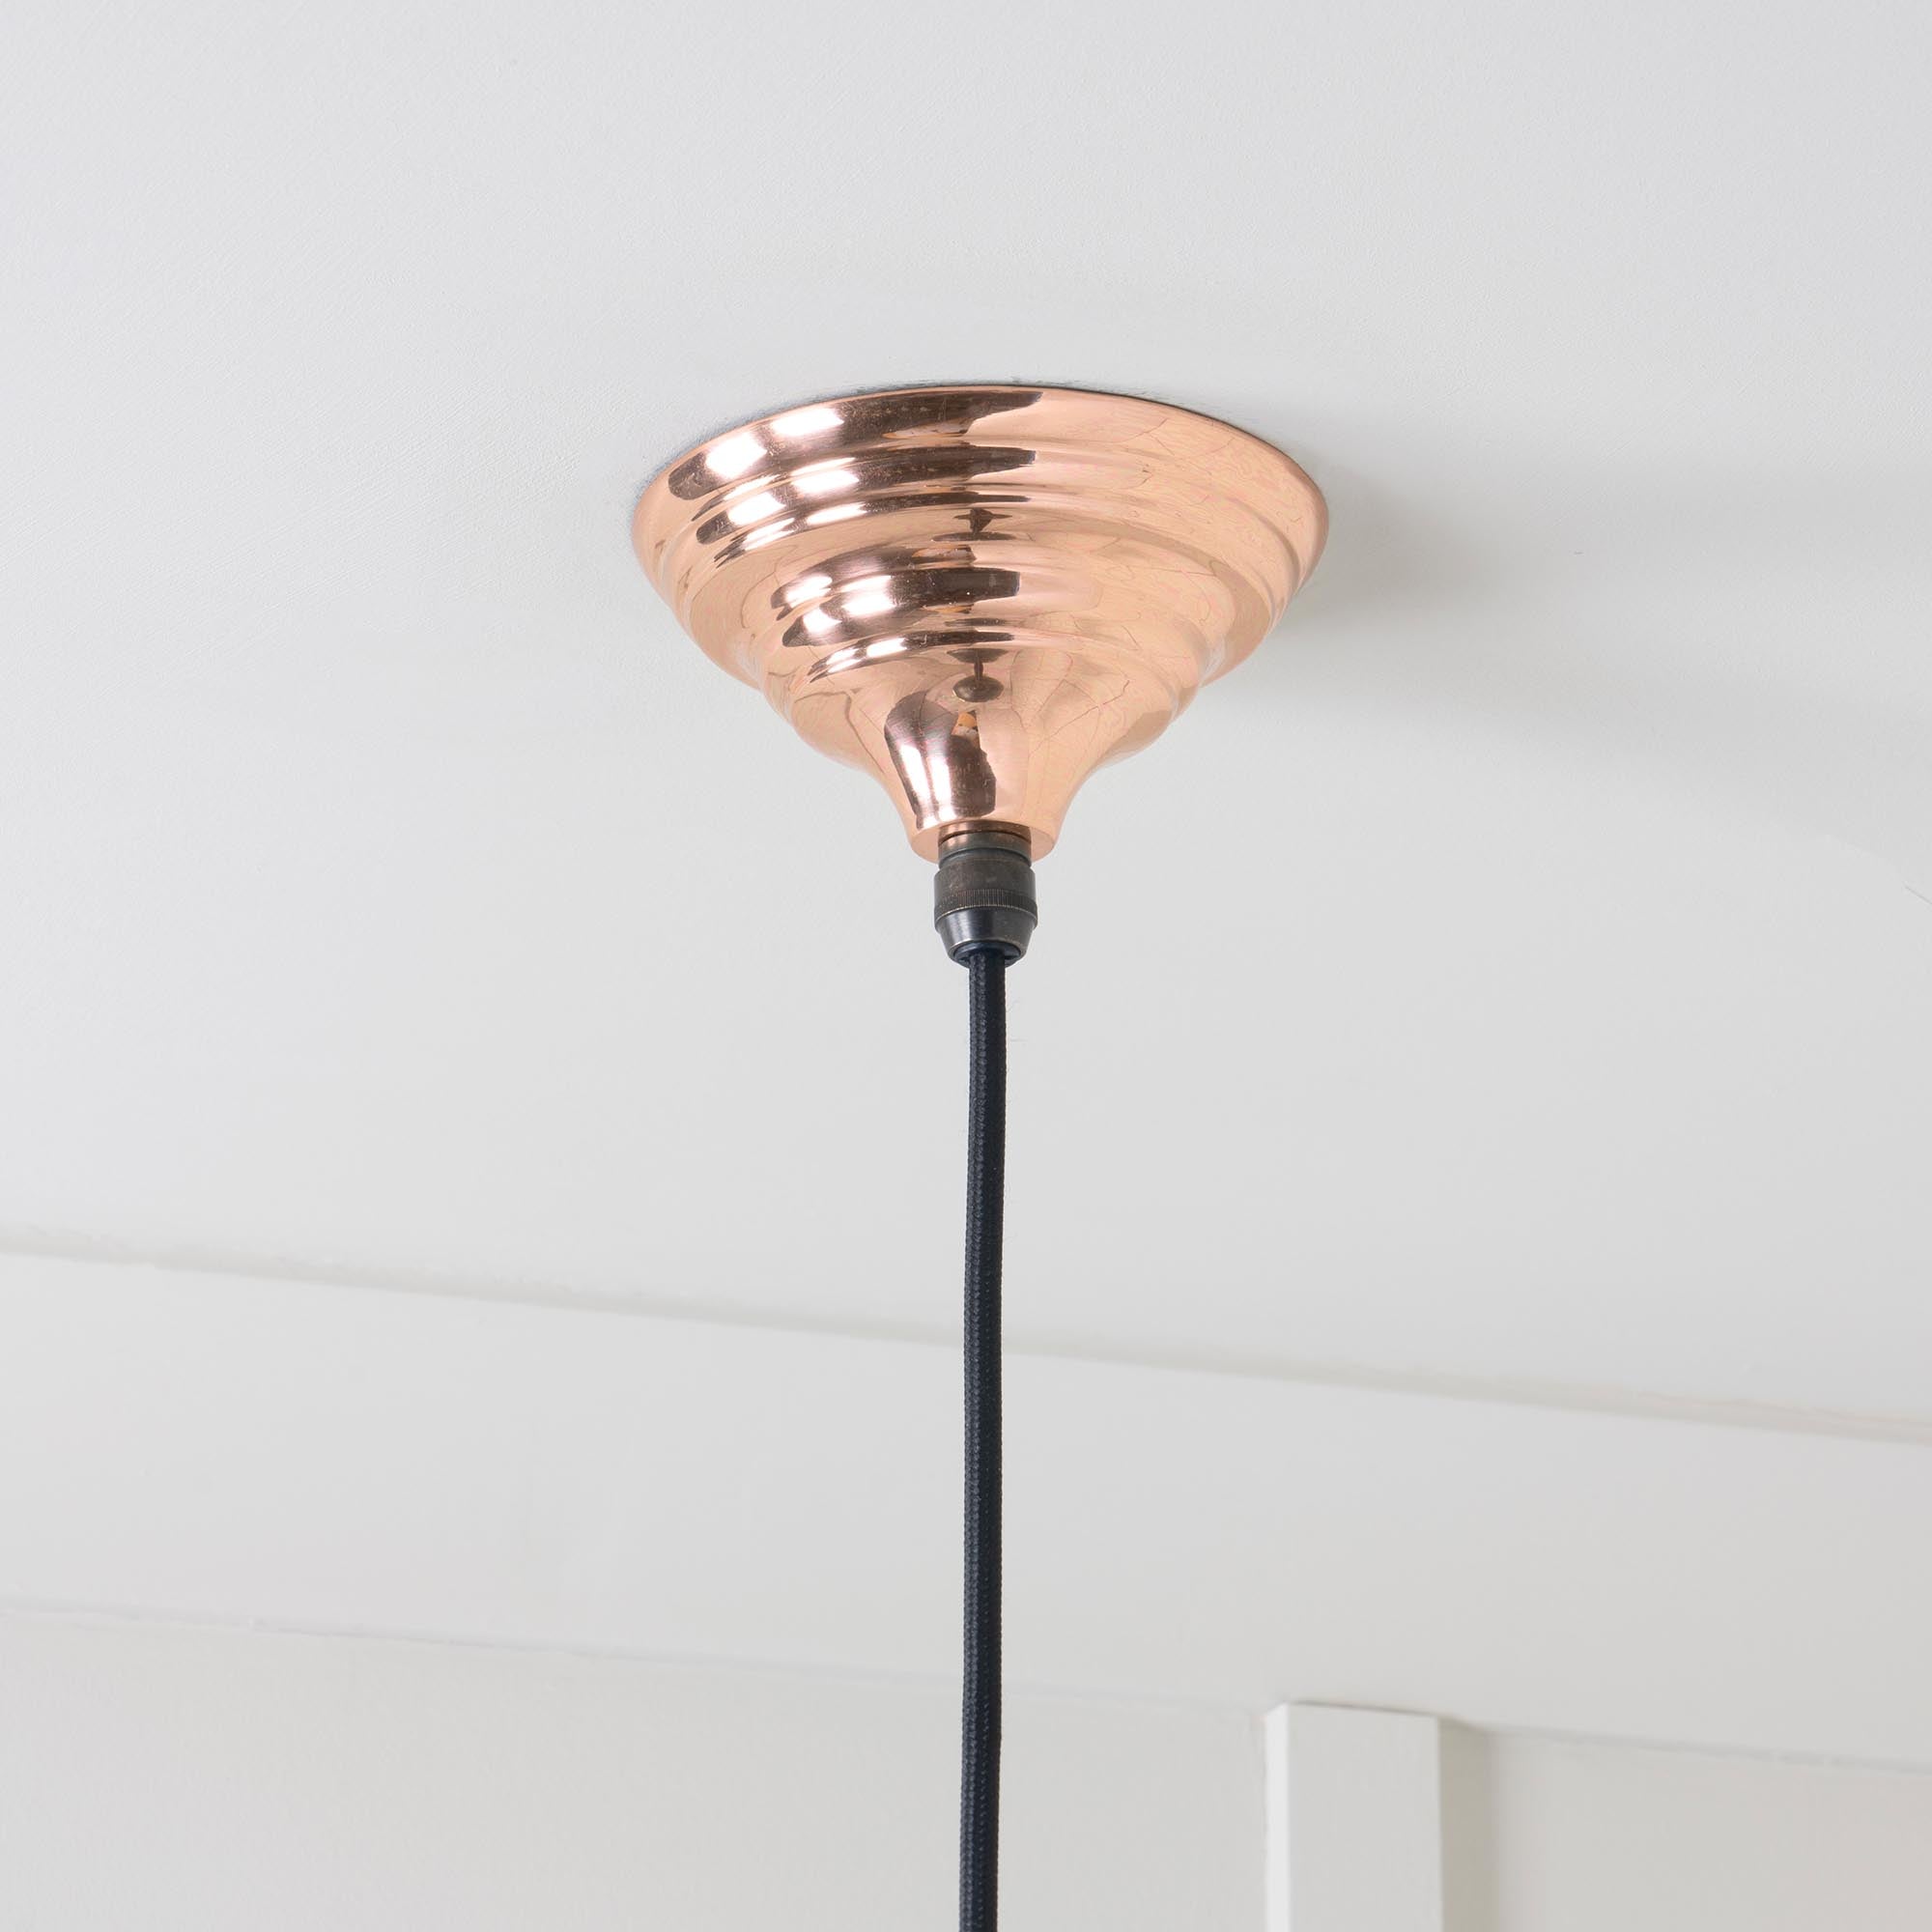 SHOW Close Up Image of Ceiling Rose For Hockley Ceiling Light in Copper